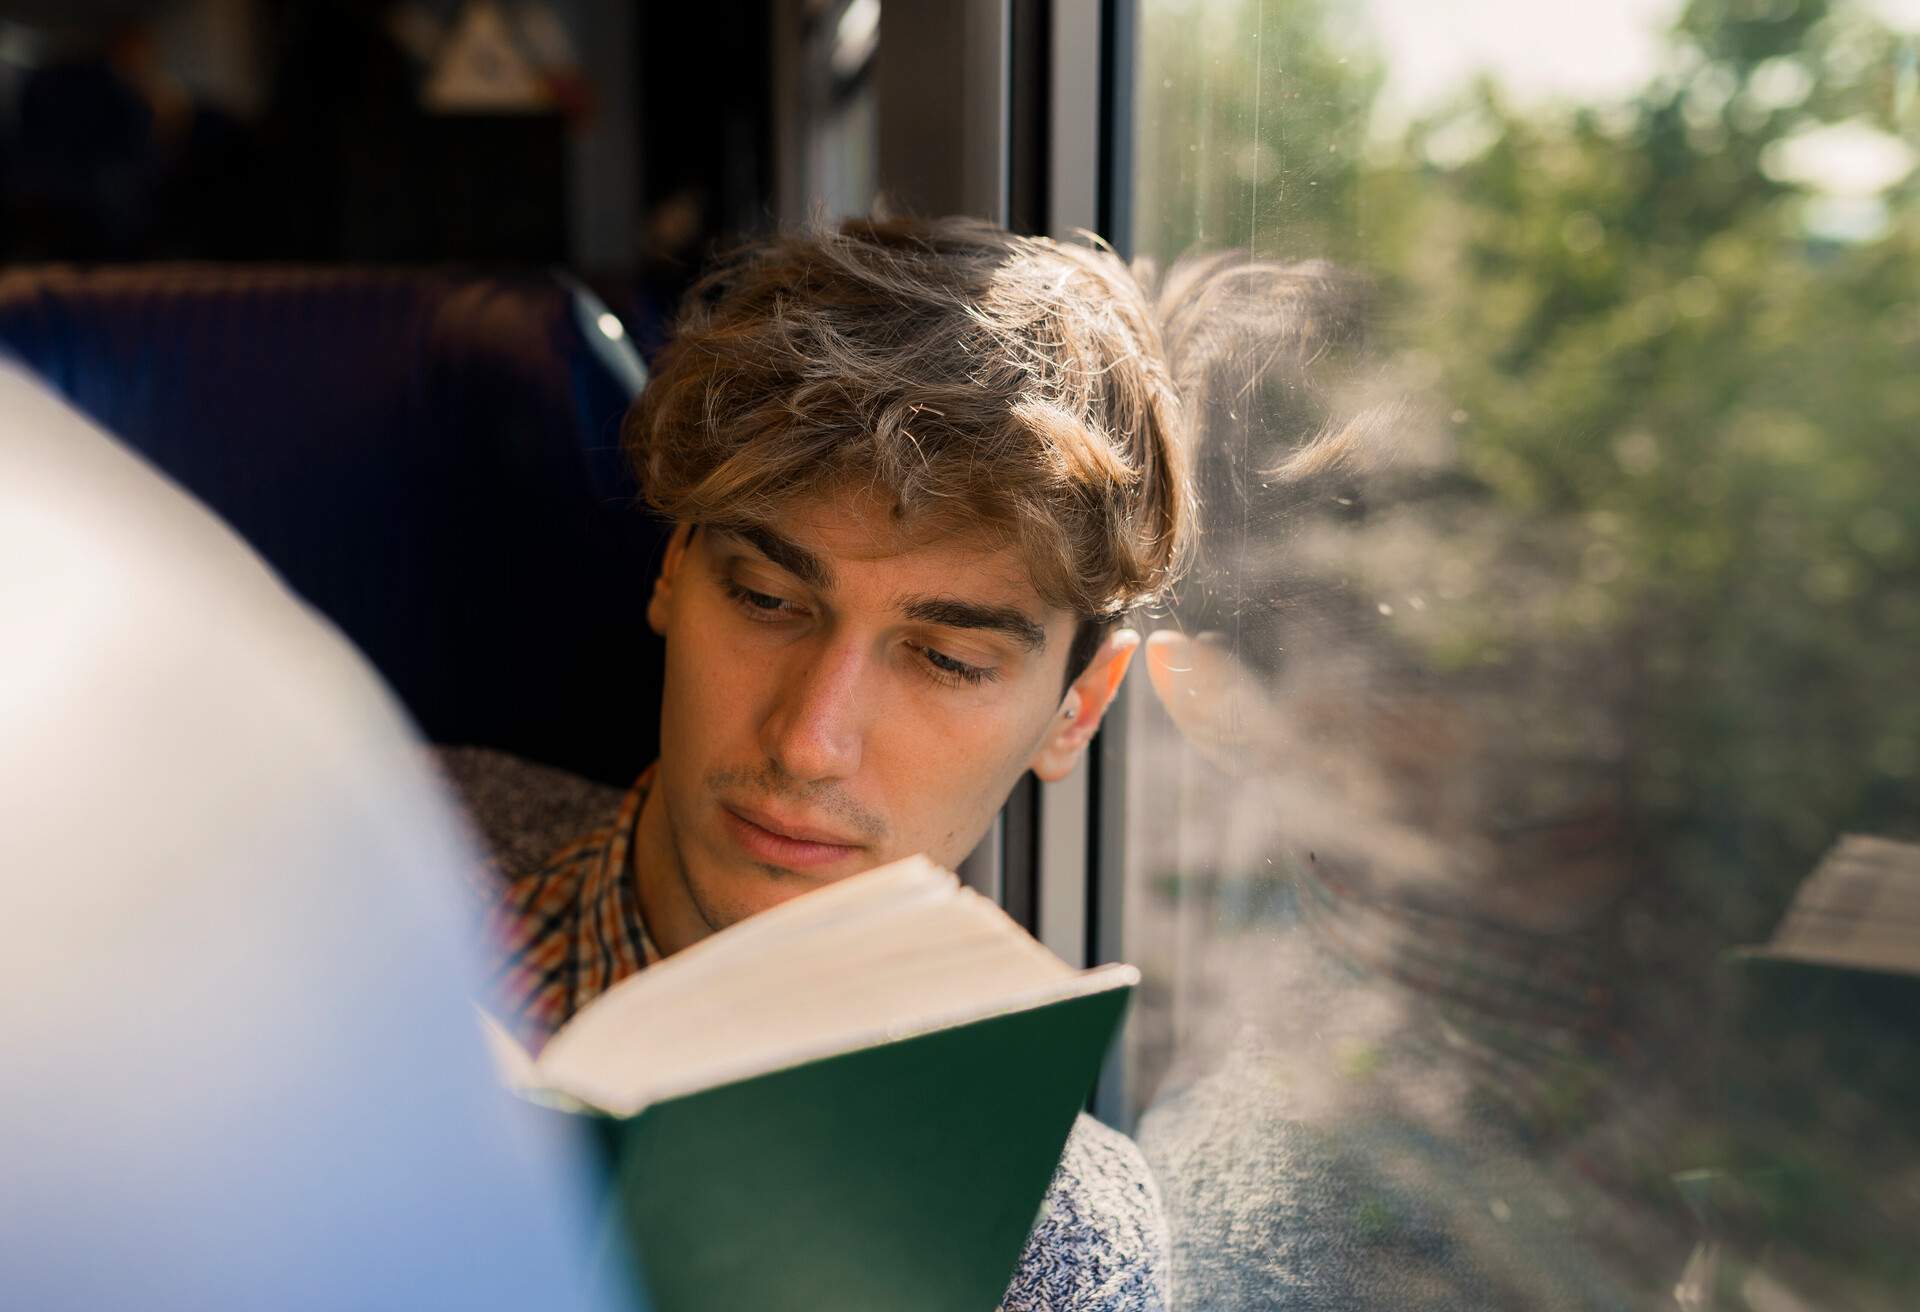 A young man reading a book while travelling on a train.